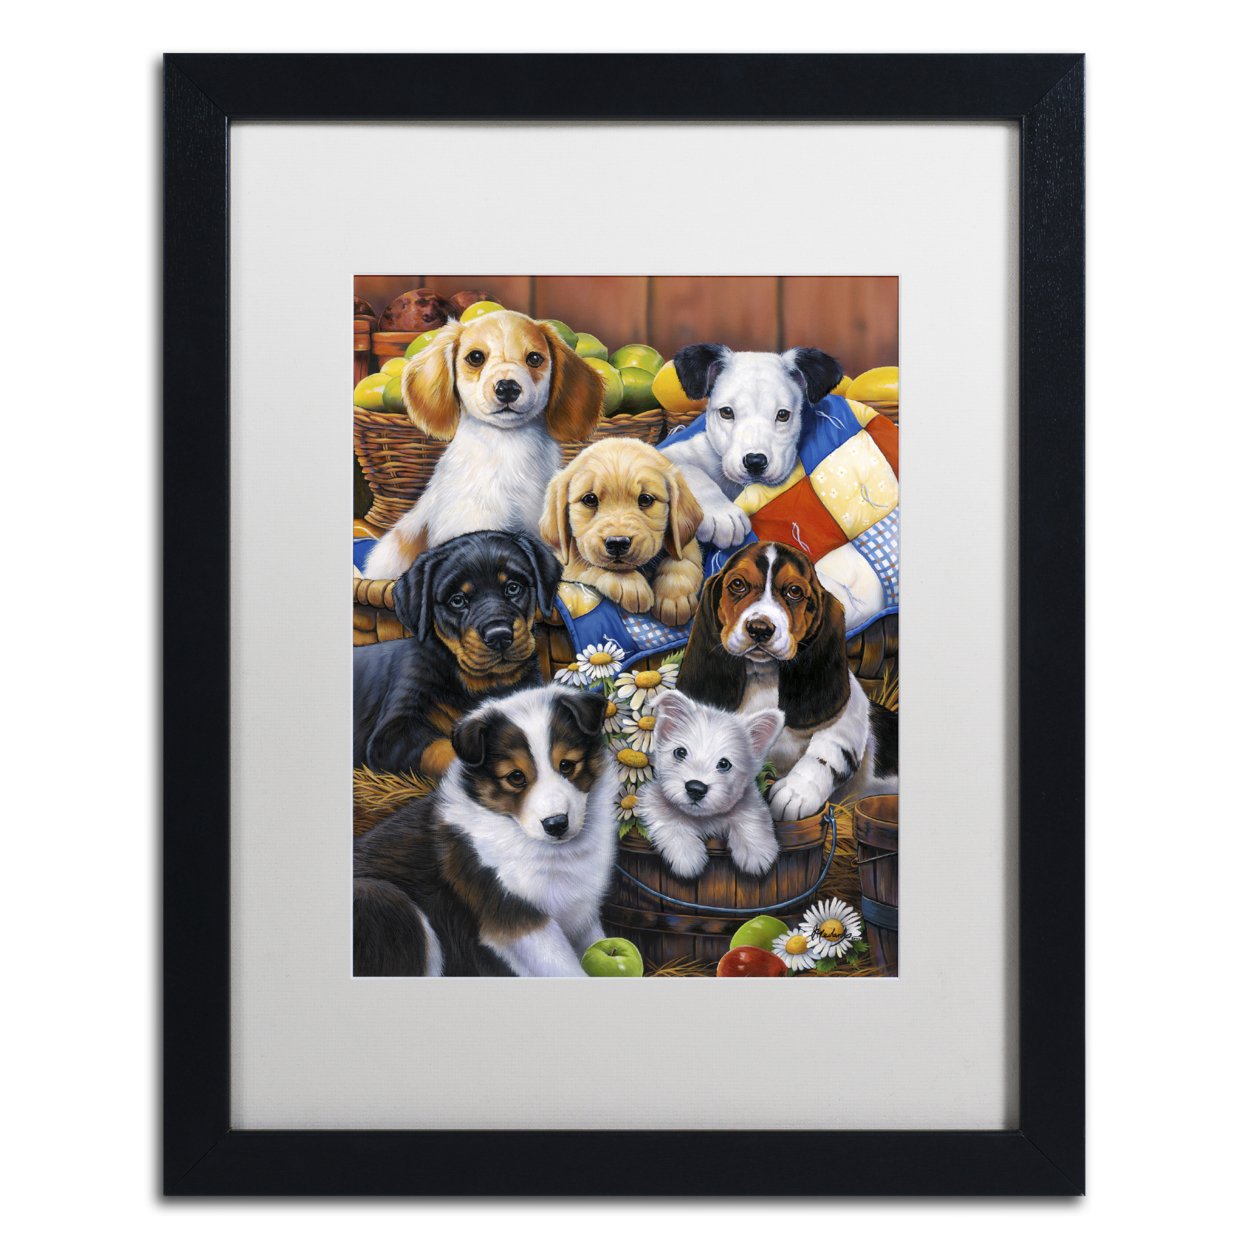 Jenny Newland 'Country Bumpkin Puppies' Black Wooden Framed Art 18 X 22 Inches